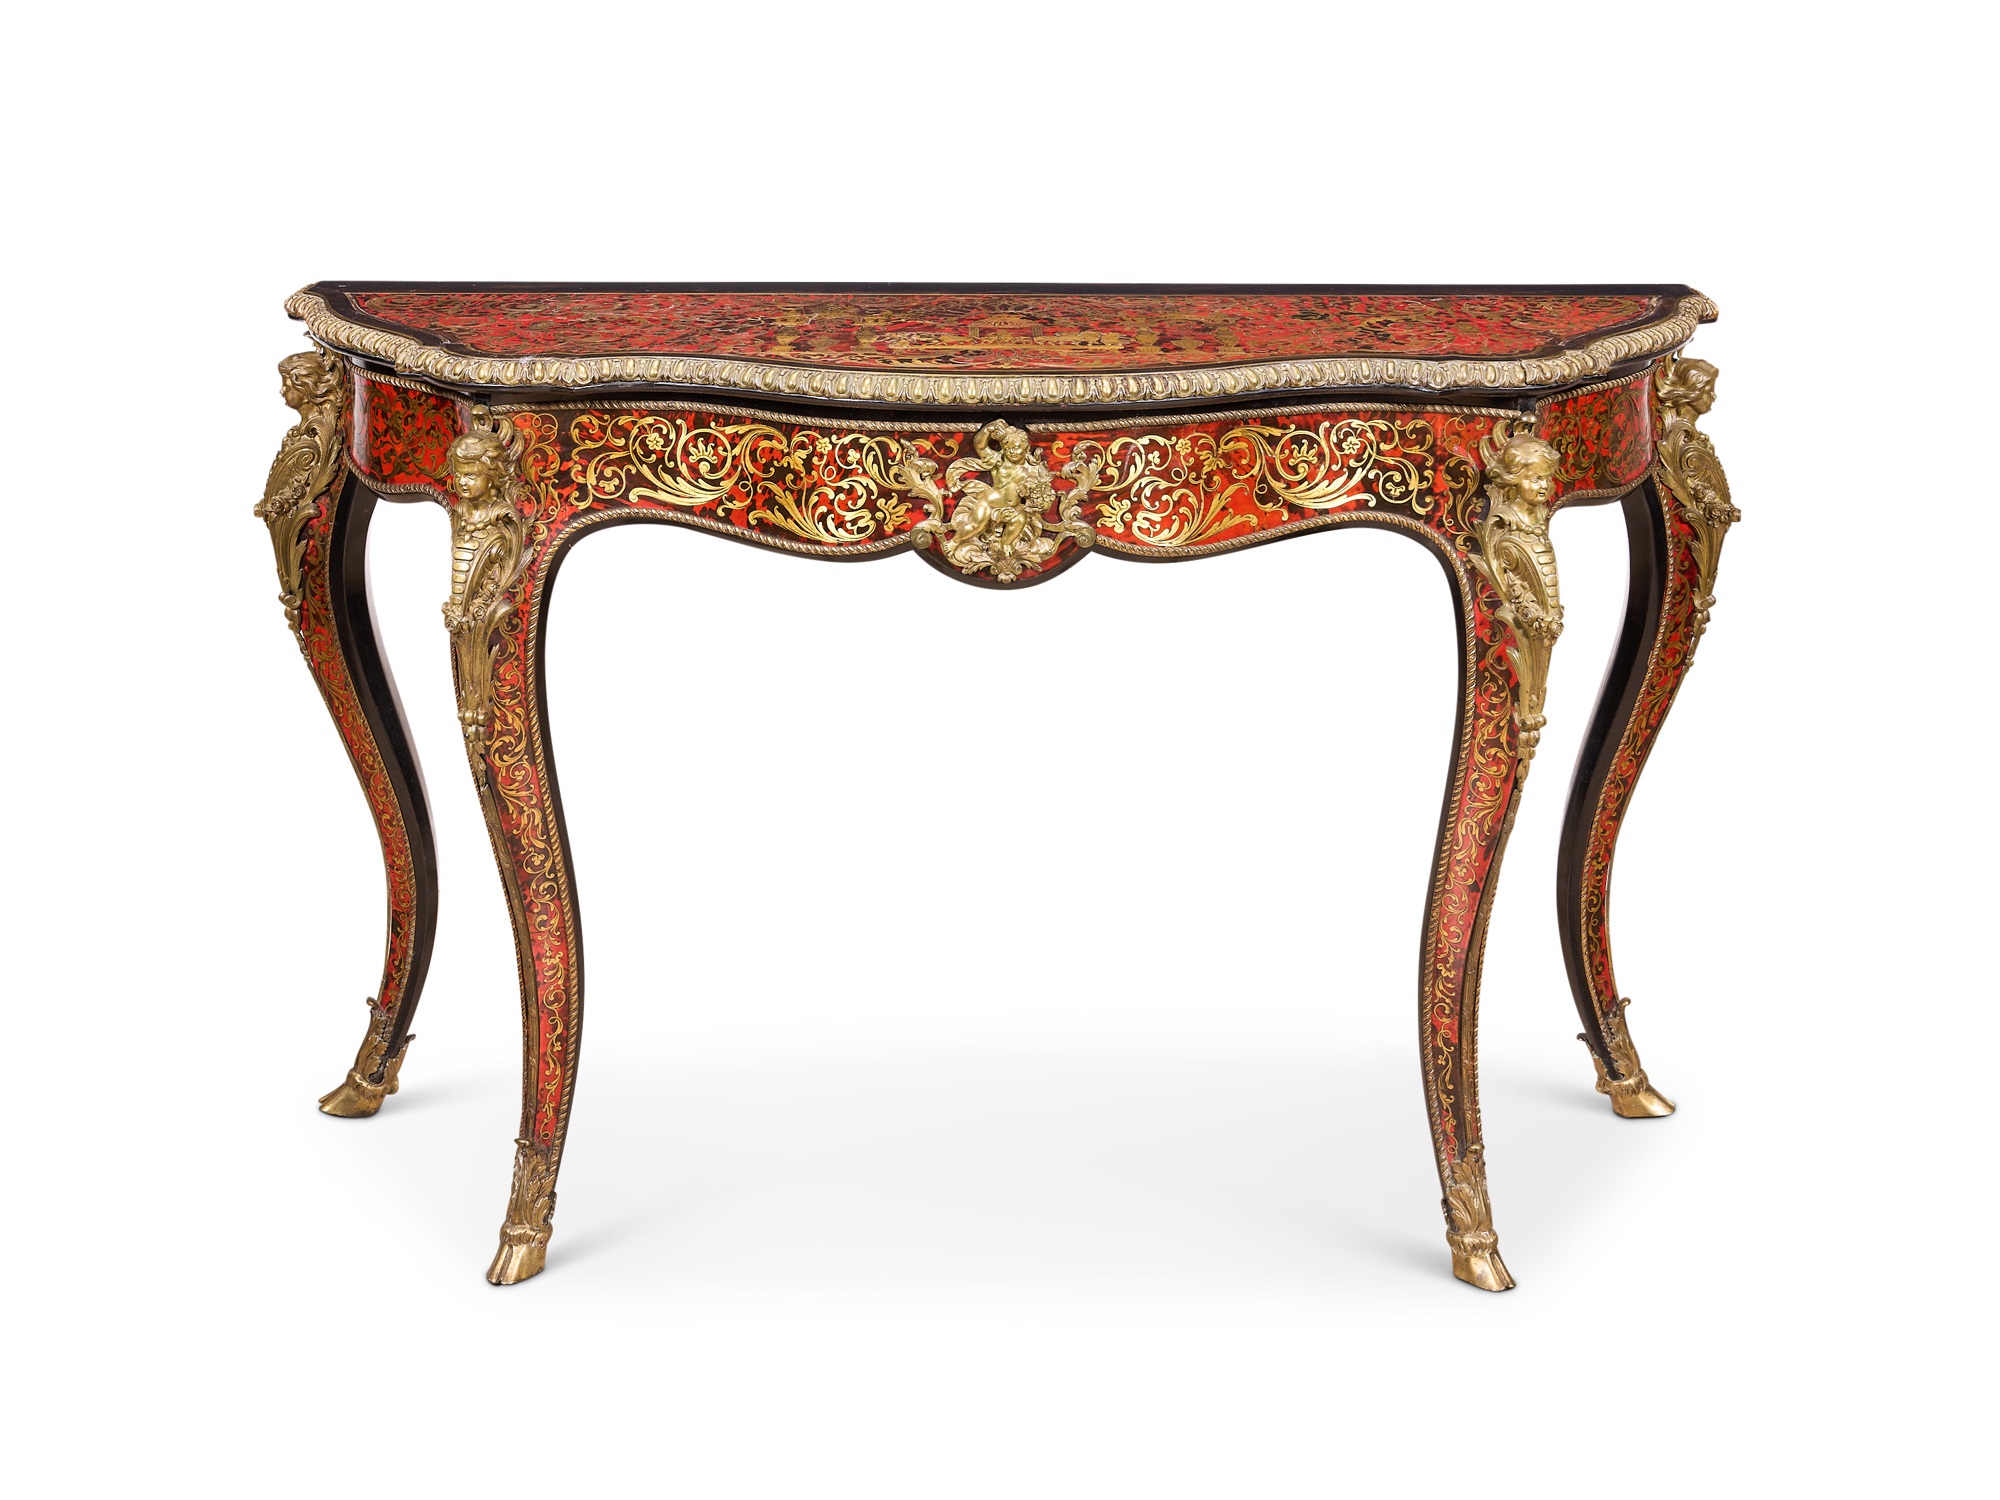 A FINE LATE 19TH CENTURY BOULLE STYLE TORTOISESHELL AND CUT BRASS CONSOLE TABLE